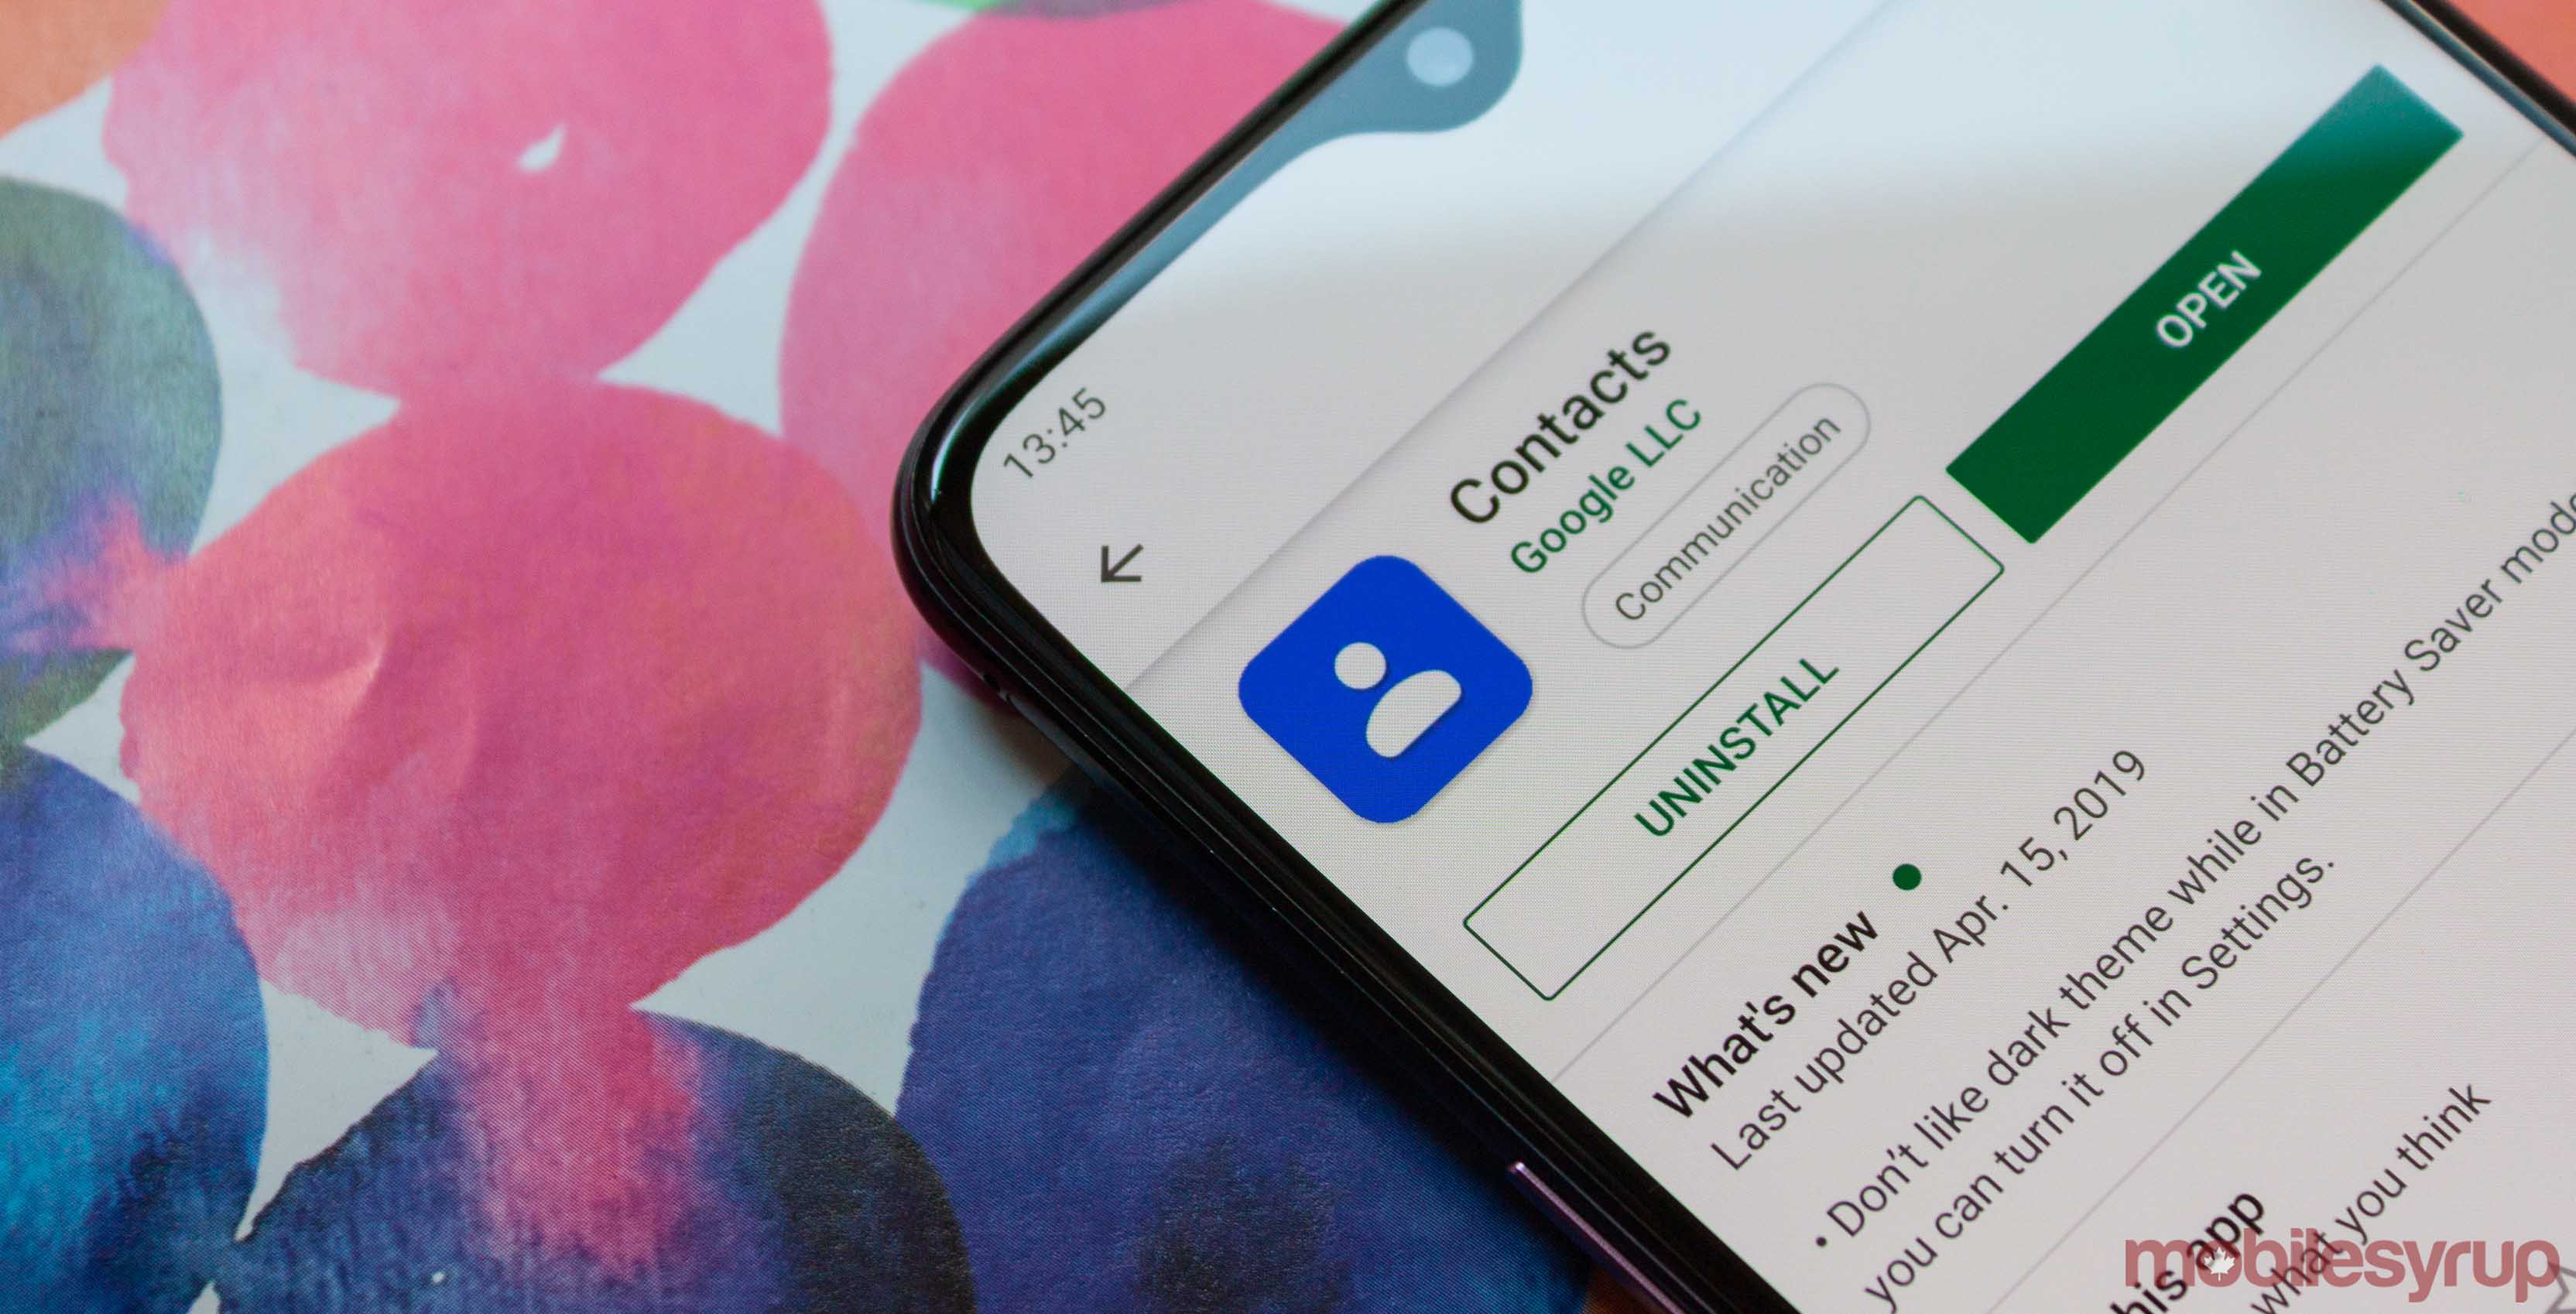 Android app makers can now turn on rounded square icons in Google Play